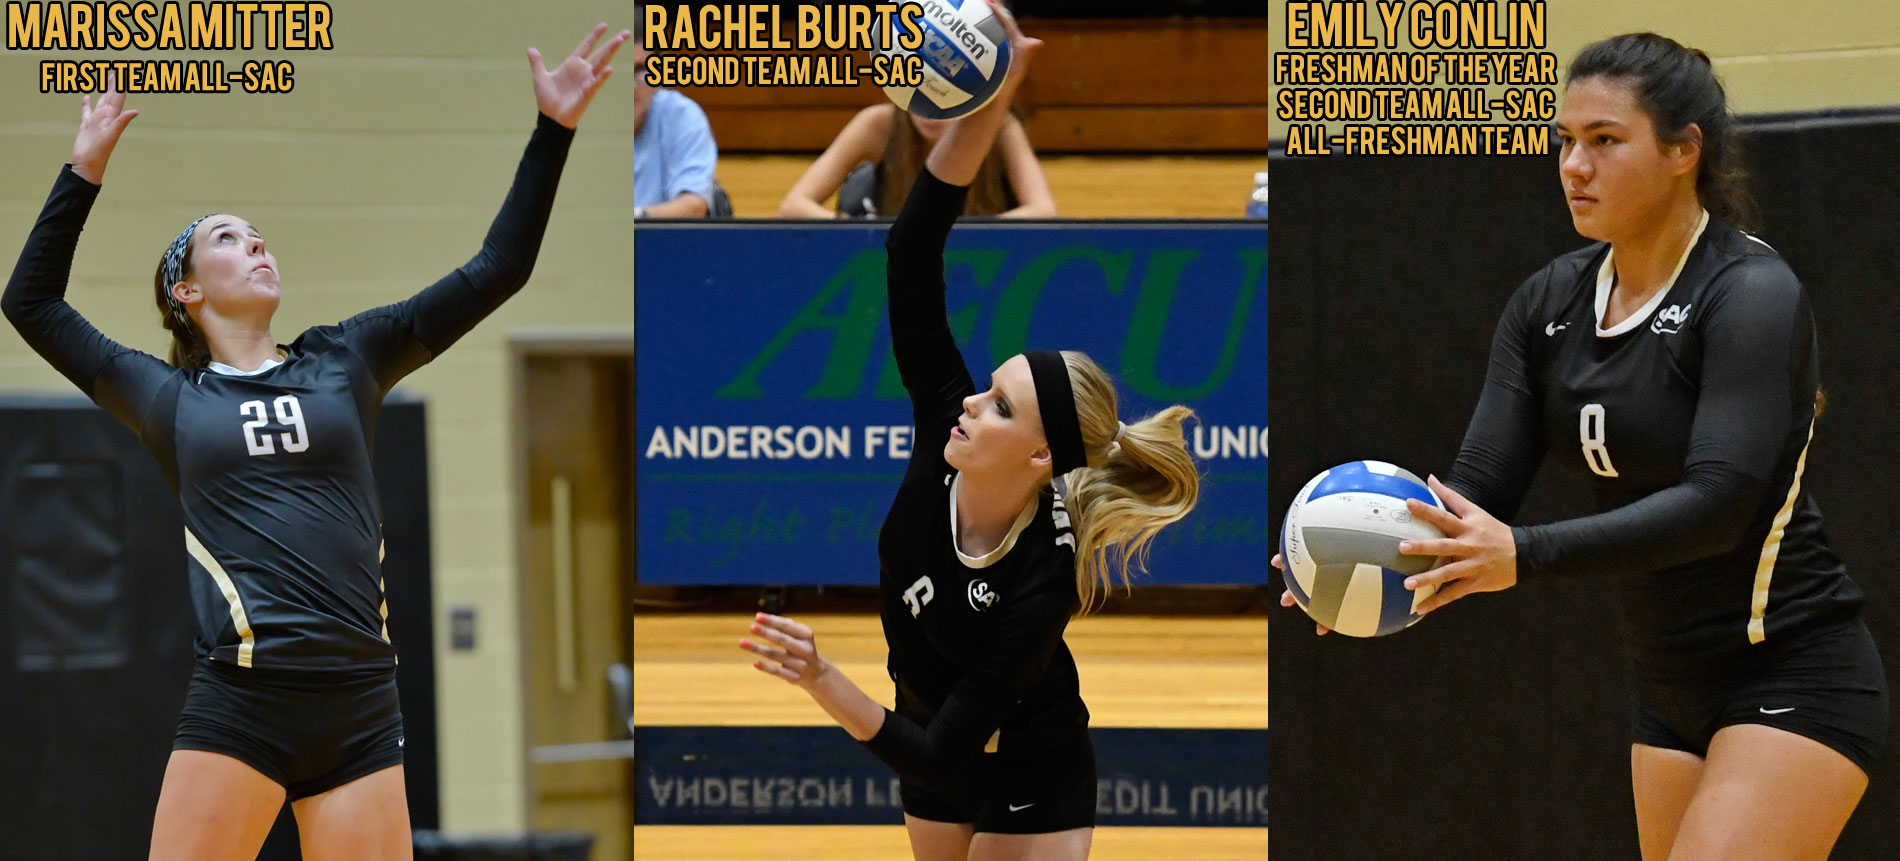 Mitter, Burts and Conlin Earn All-South Atlantic Conference Accolades